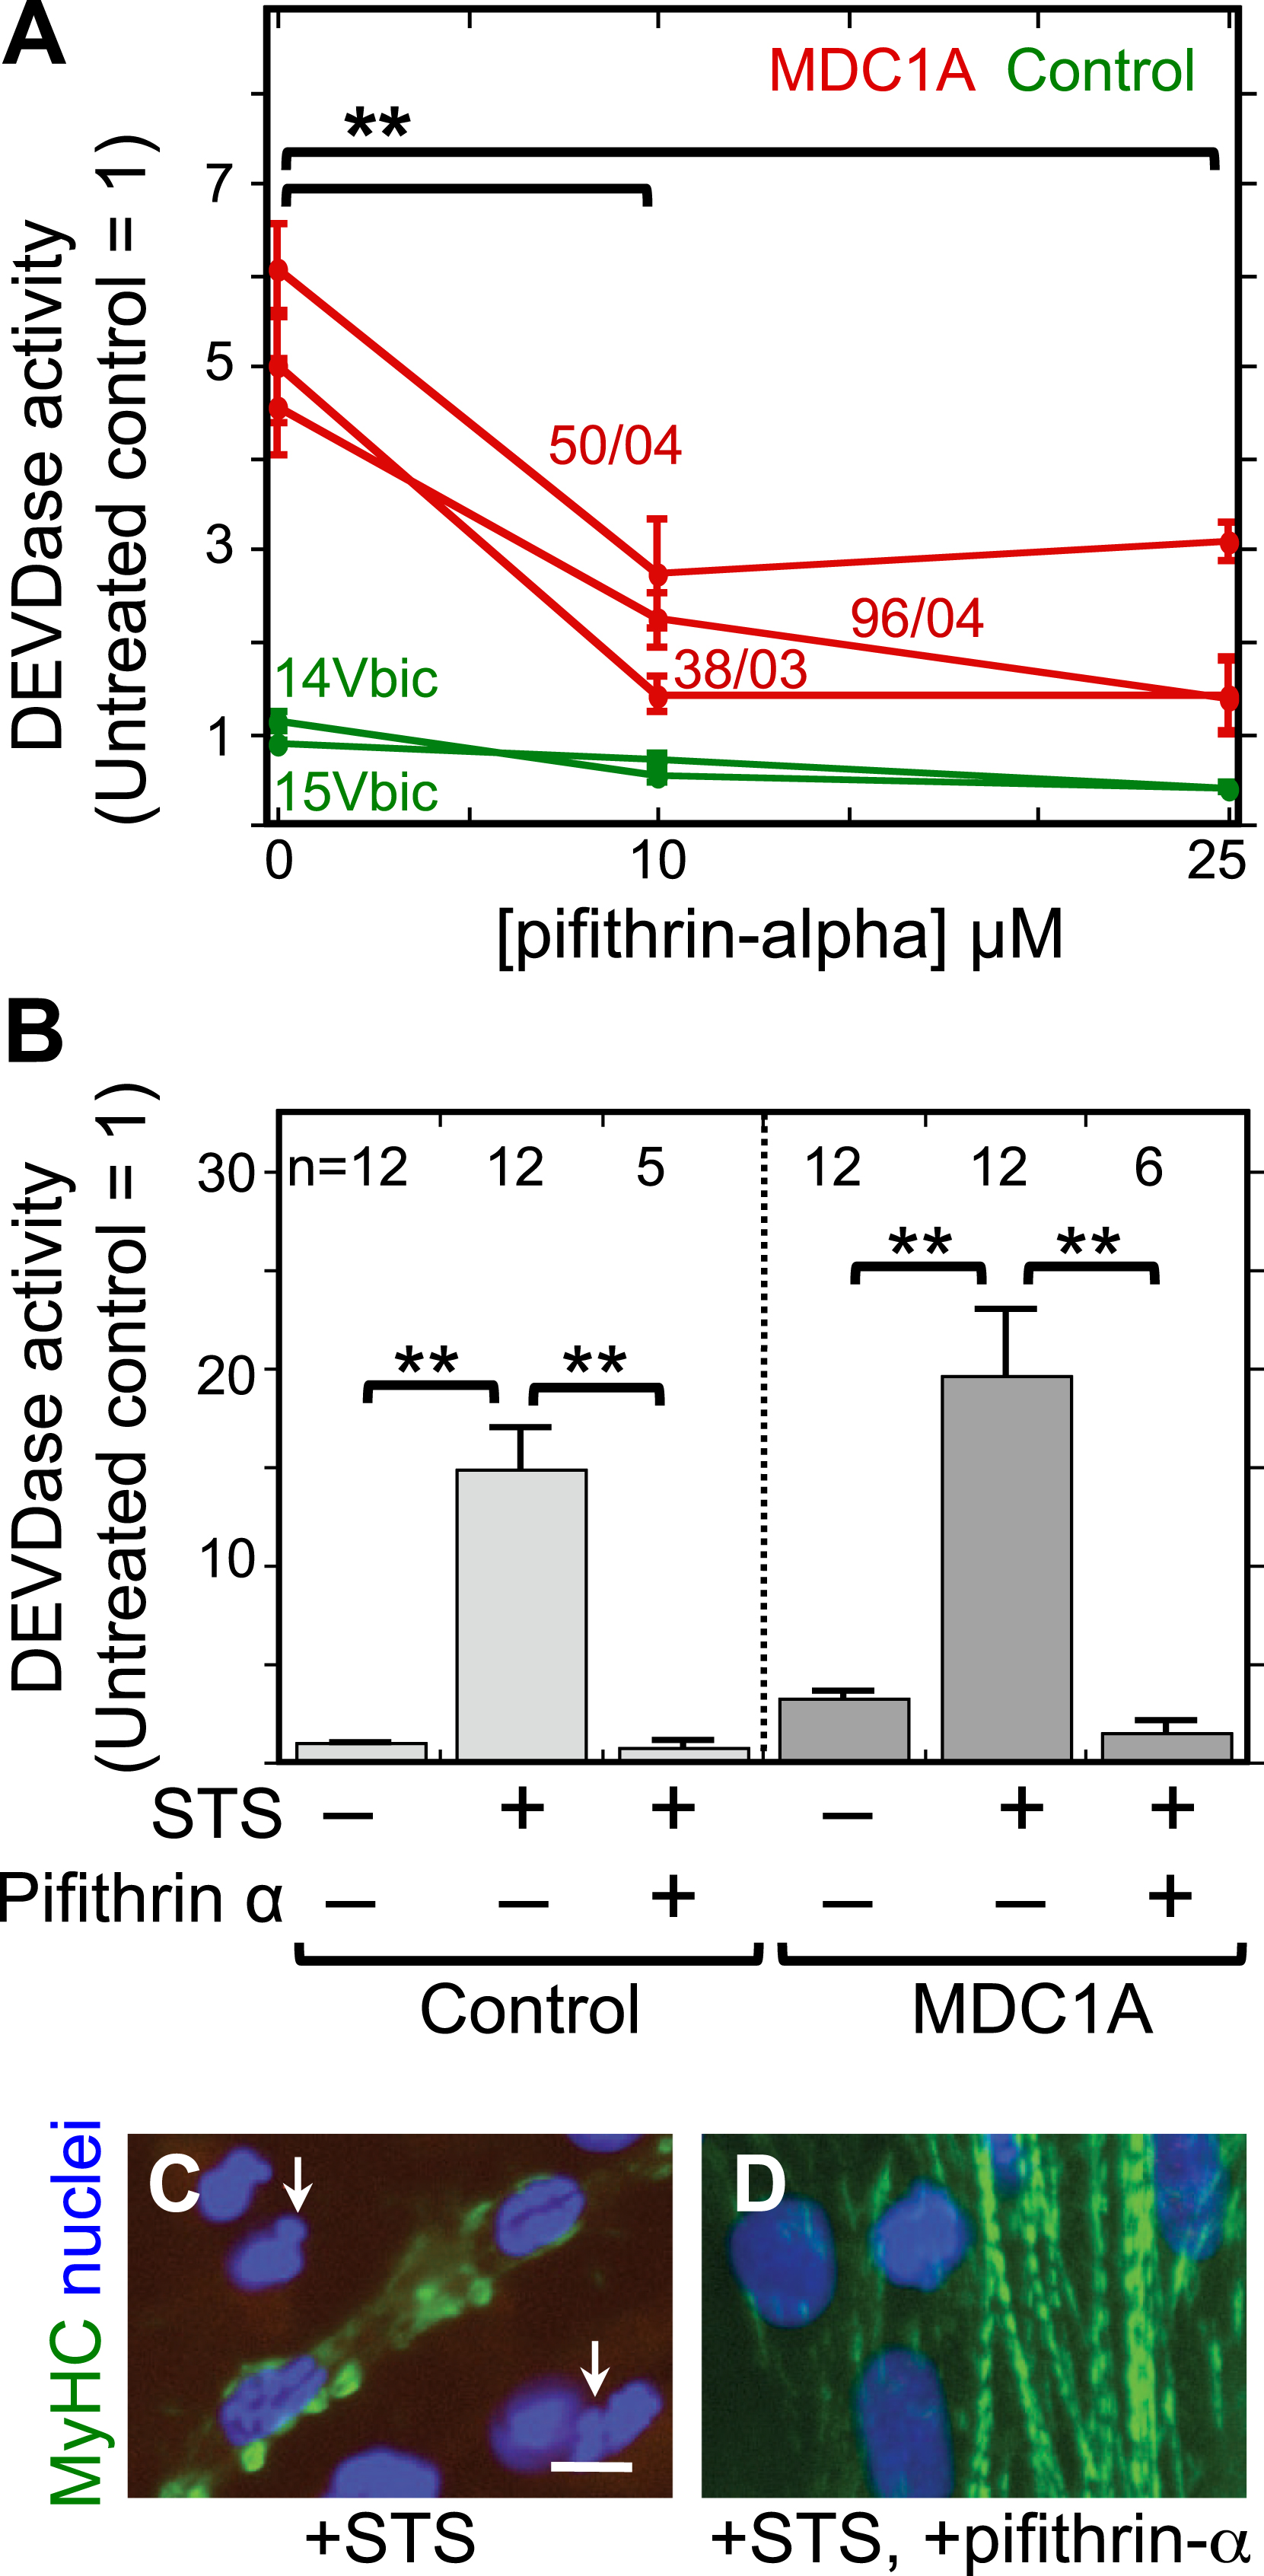 The p53 inhibitor pifithrin-alpha decreased both spontaneous and staurosporine-induced caspase activity in MDC1A myogenic cells. A. Cultures of MDC1A (red lines) and healthy control (green lines) myogenic cells were incubated with pifithrin-alpha at the indicated concentrations and assayed for caspase 3/7 (DEVDase) enzymatic activity after four days in differentiation medium. Caspase values were normalized so that the average of the untreated healthy controls = 1. Error bars = SE; **P < 0.01 by ANOVA to compare values at 0, 10μM, and 25μM; n = 3 for cells of each individual donor. B. As indicated, cells were either left untreated or treated with 25μM pifithrin-alpha as in panel A either without staurosporine (STS) or with staurosporine at 1μM for the final 4.5 h prior to harvest. Pifithrin-alpha treatment reduced both spontaneous and staurosporine-induced caspase activity in MDC1A cultures. Error bars = SE; **P < 0.01 by ANOVA; n as indicated. Healthy control cells included 15Vbic, 16Ubic, and 21Ubic. MDC1A cells included 38/03, 50/04, and 96/04. C, D. Treatment with staurosporine (+STS) at 1μM for 4.5 h hours generated morphological abnormalities of nuclei (blue) including blebbing and fragmentation (e.g., arrows in panel C) and disrupted the striated organization of myosin heavy chain (MyHC, green) in MDC1A (50/04) cultures (panel C). However, these staurosporine-induced changes were largely eliminated when the p53 inhibitor pifithrin-alpha (+pifithrin-α) at 25μM was included in combination with staurosporine (panel D). Bar in panel C = 20μm.